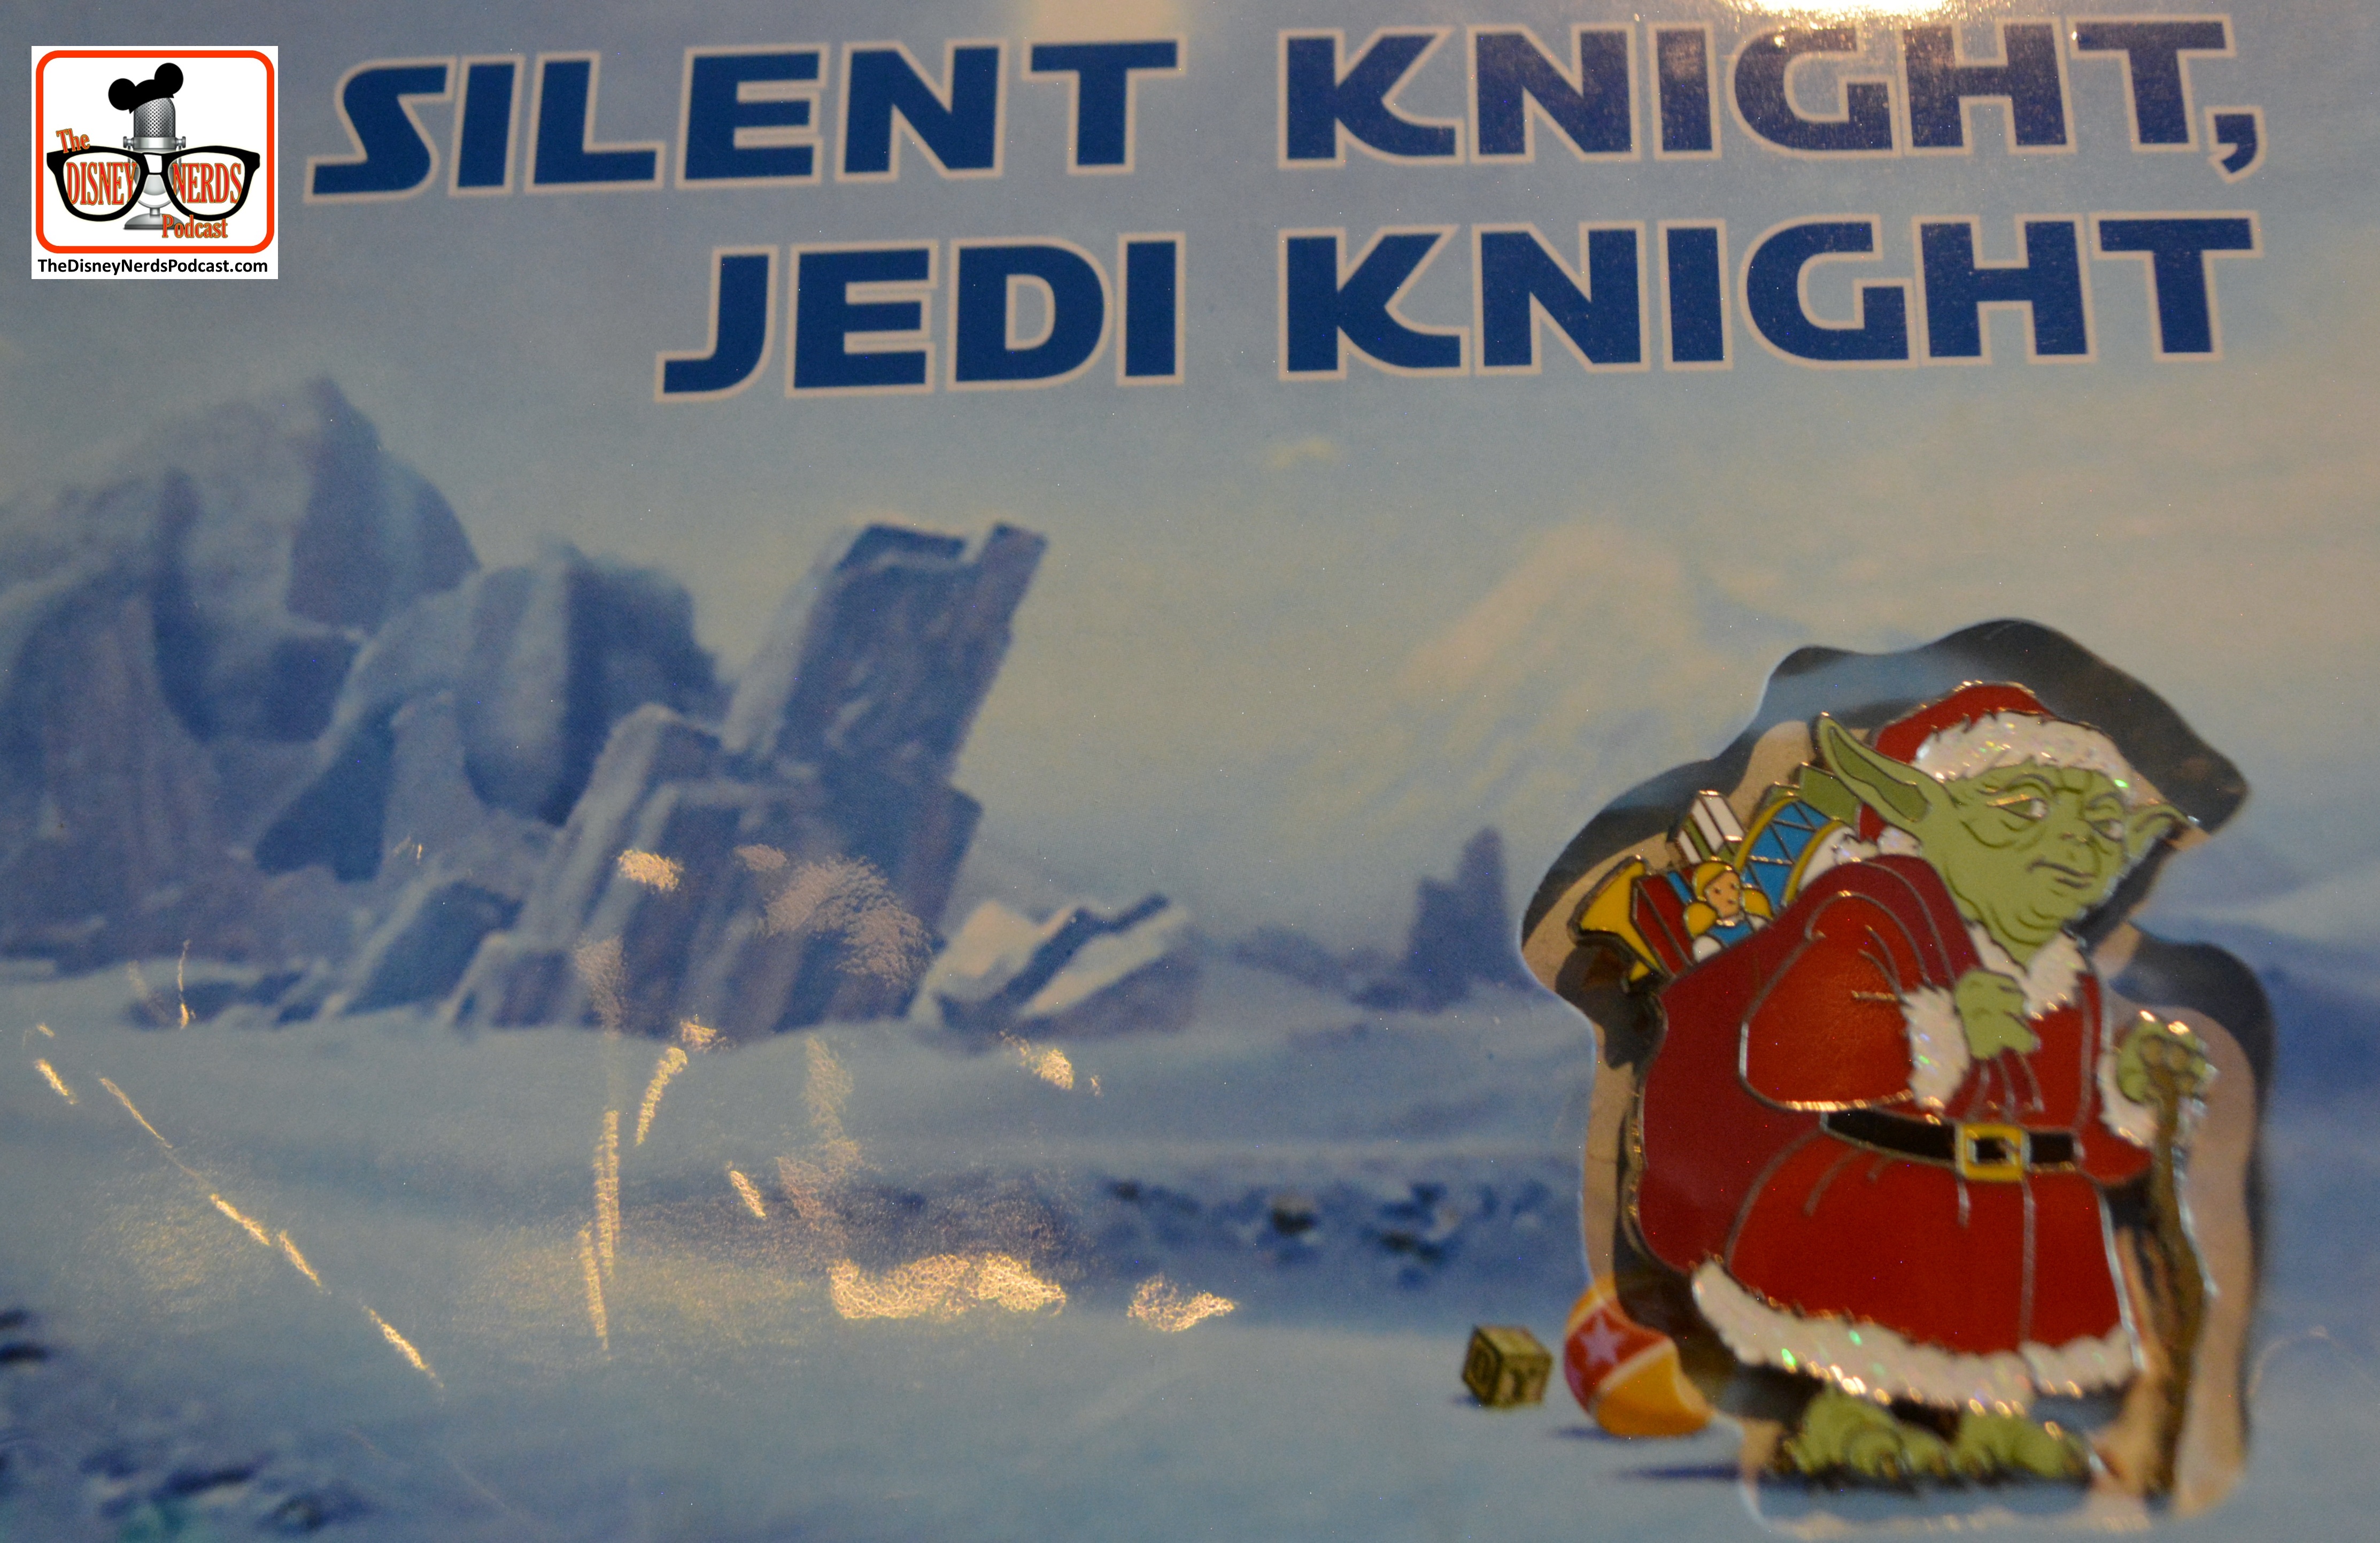 The Season of the Force is getting closer.... Silent Knight, Jedi Knight... Won't be long till someone finished the song.